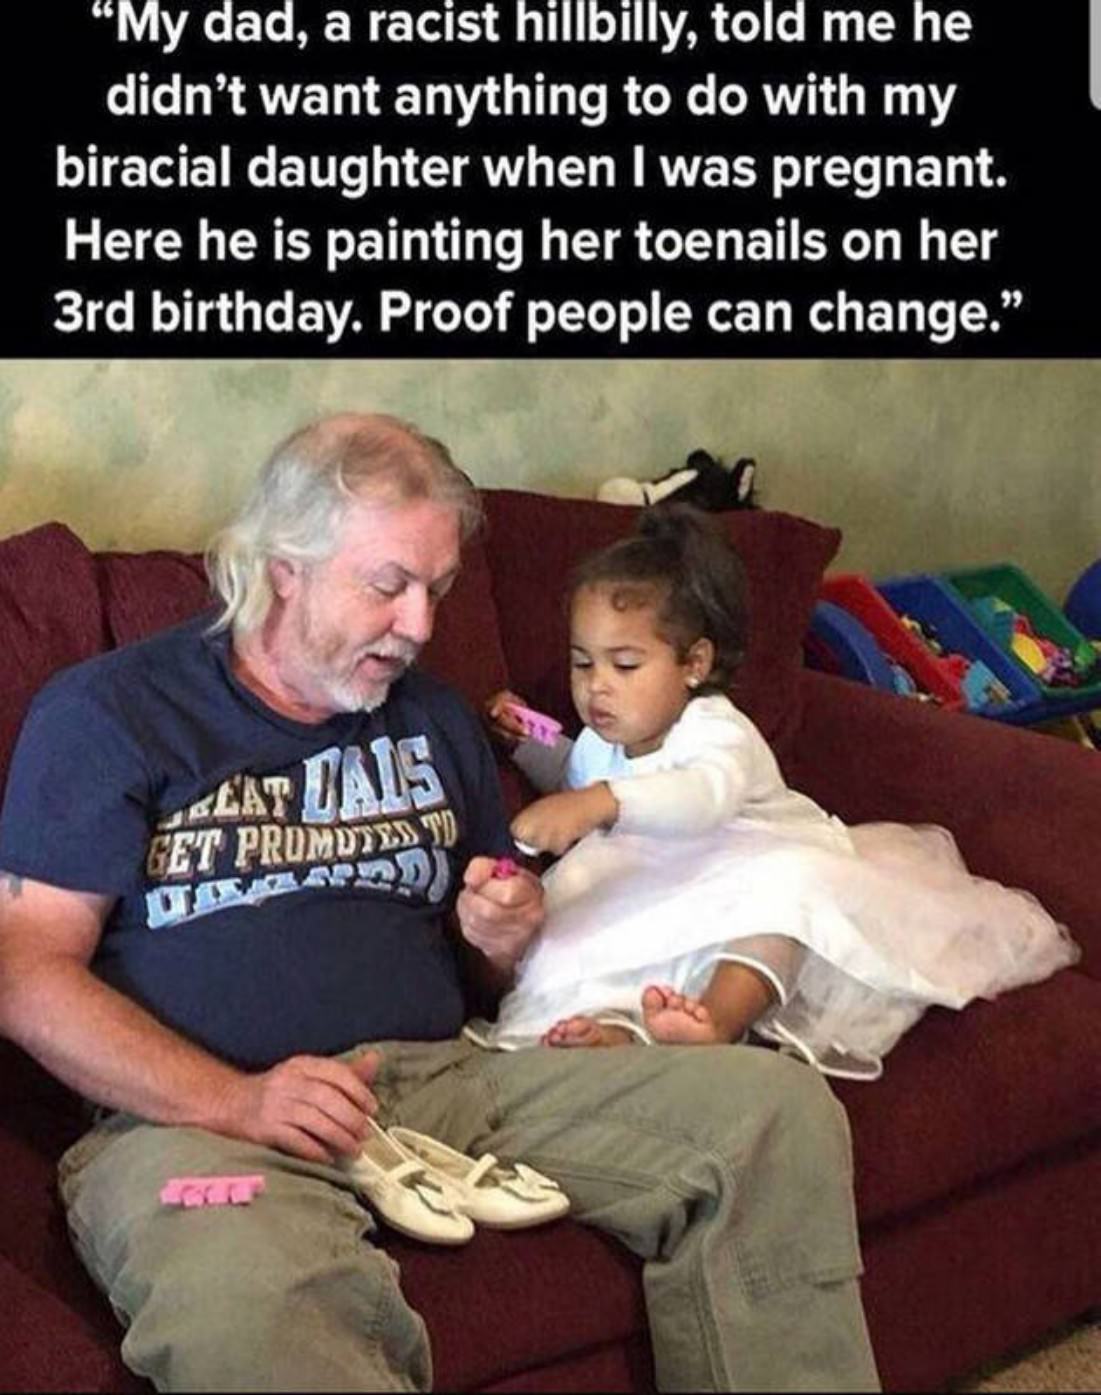 Some Faith in humanity restored